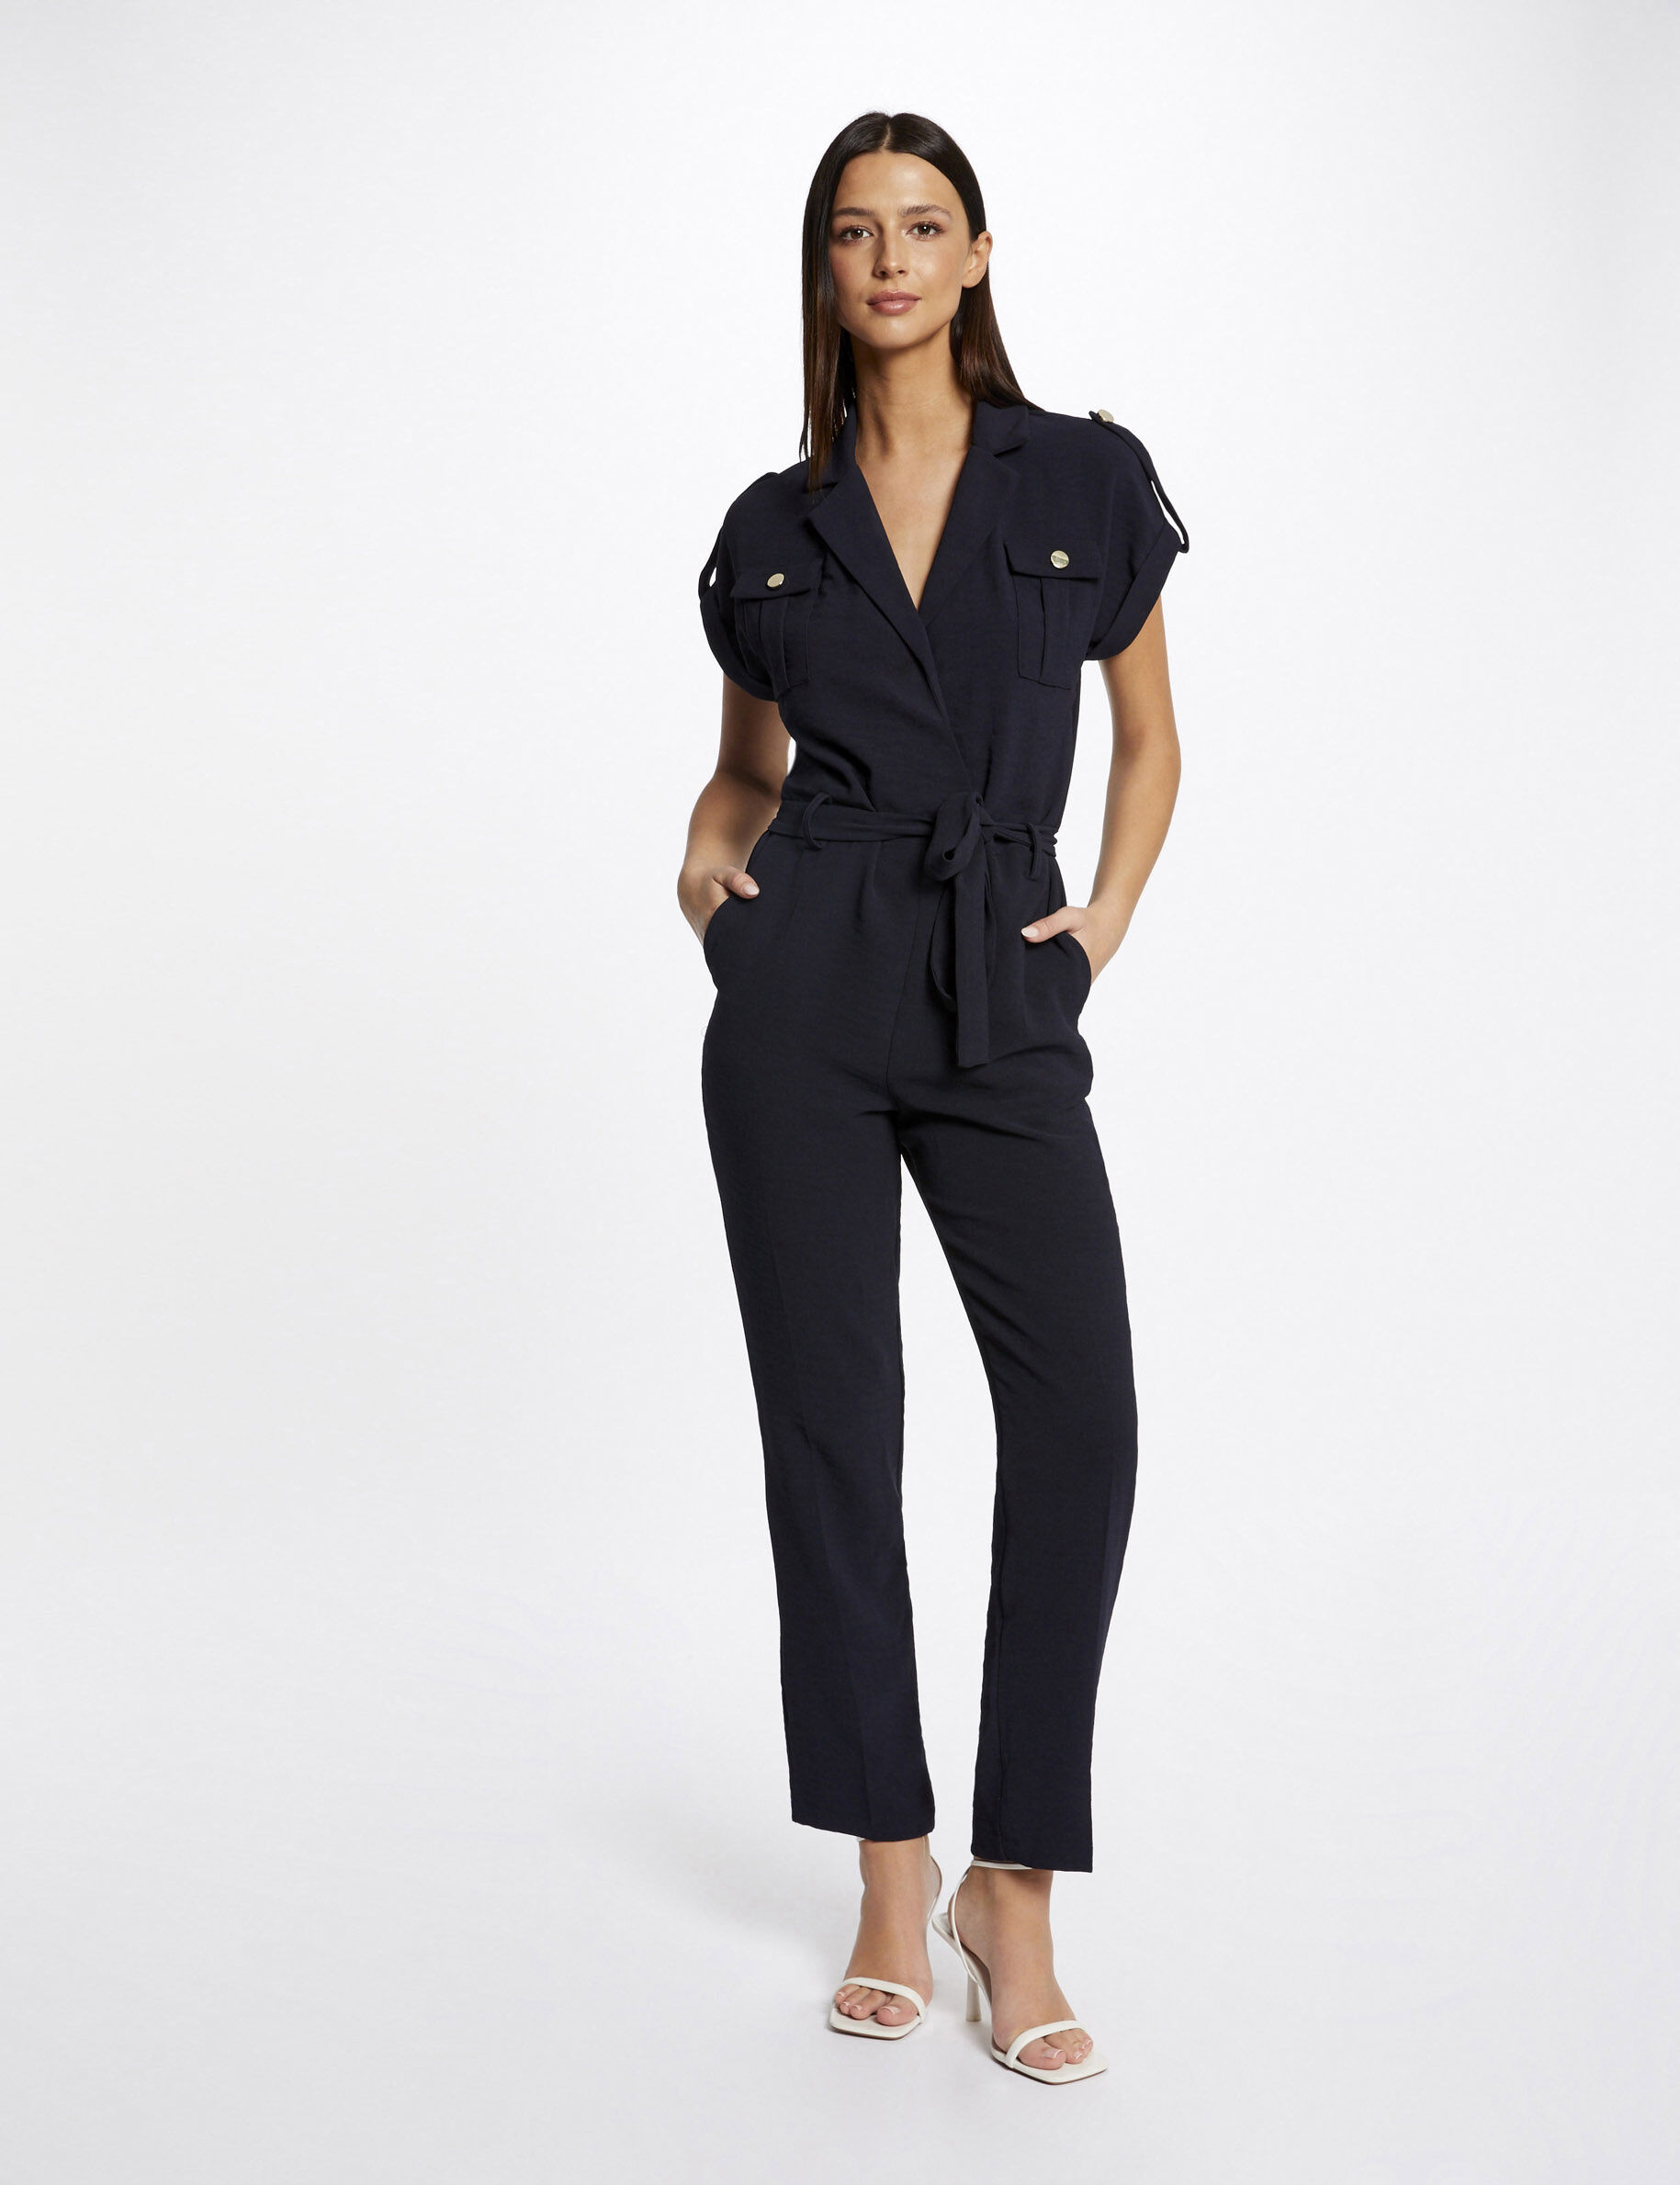 Black And Stone Polka Dot 2 in 1 Jumpsuit – AX Paris